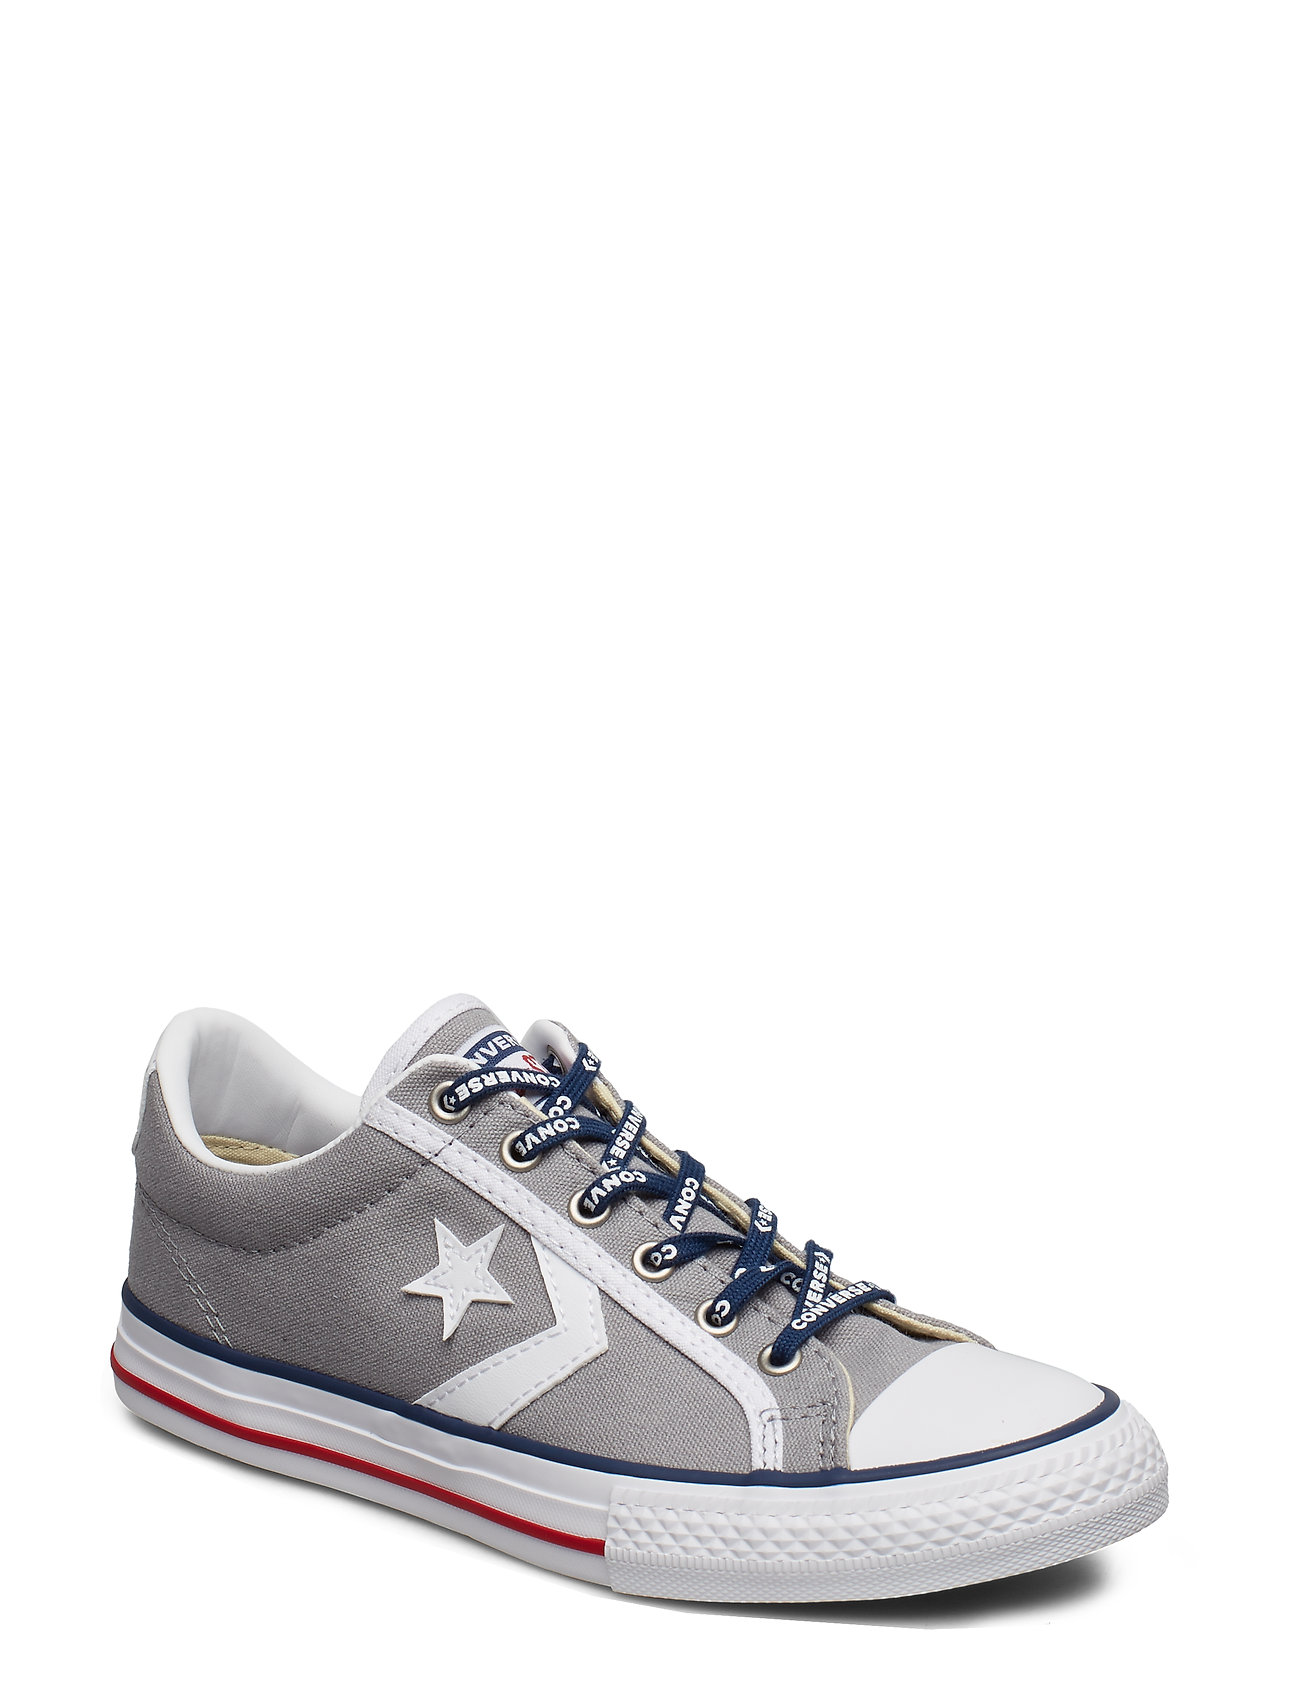 converse star player dolphin